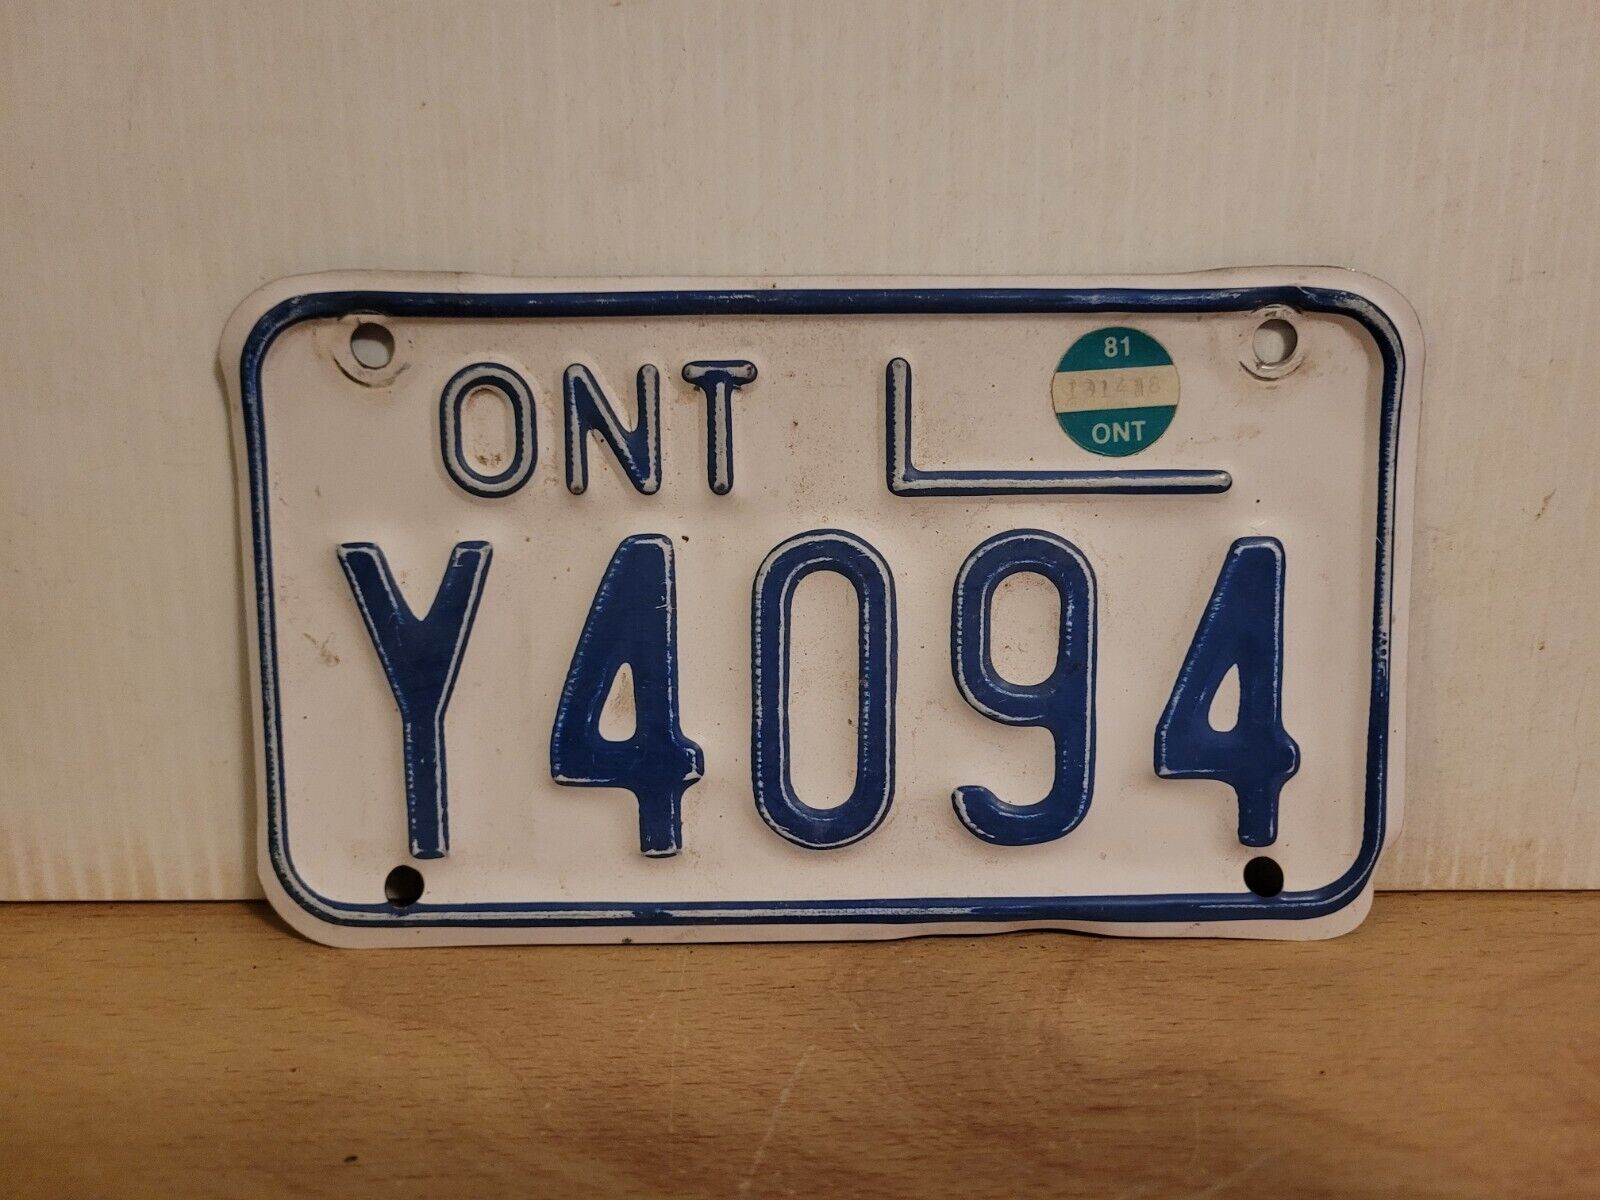 1981 Ontario MOTORCYCLE License Plate Tag.